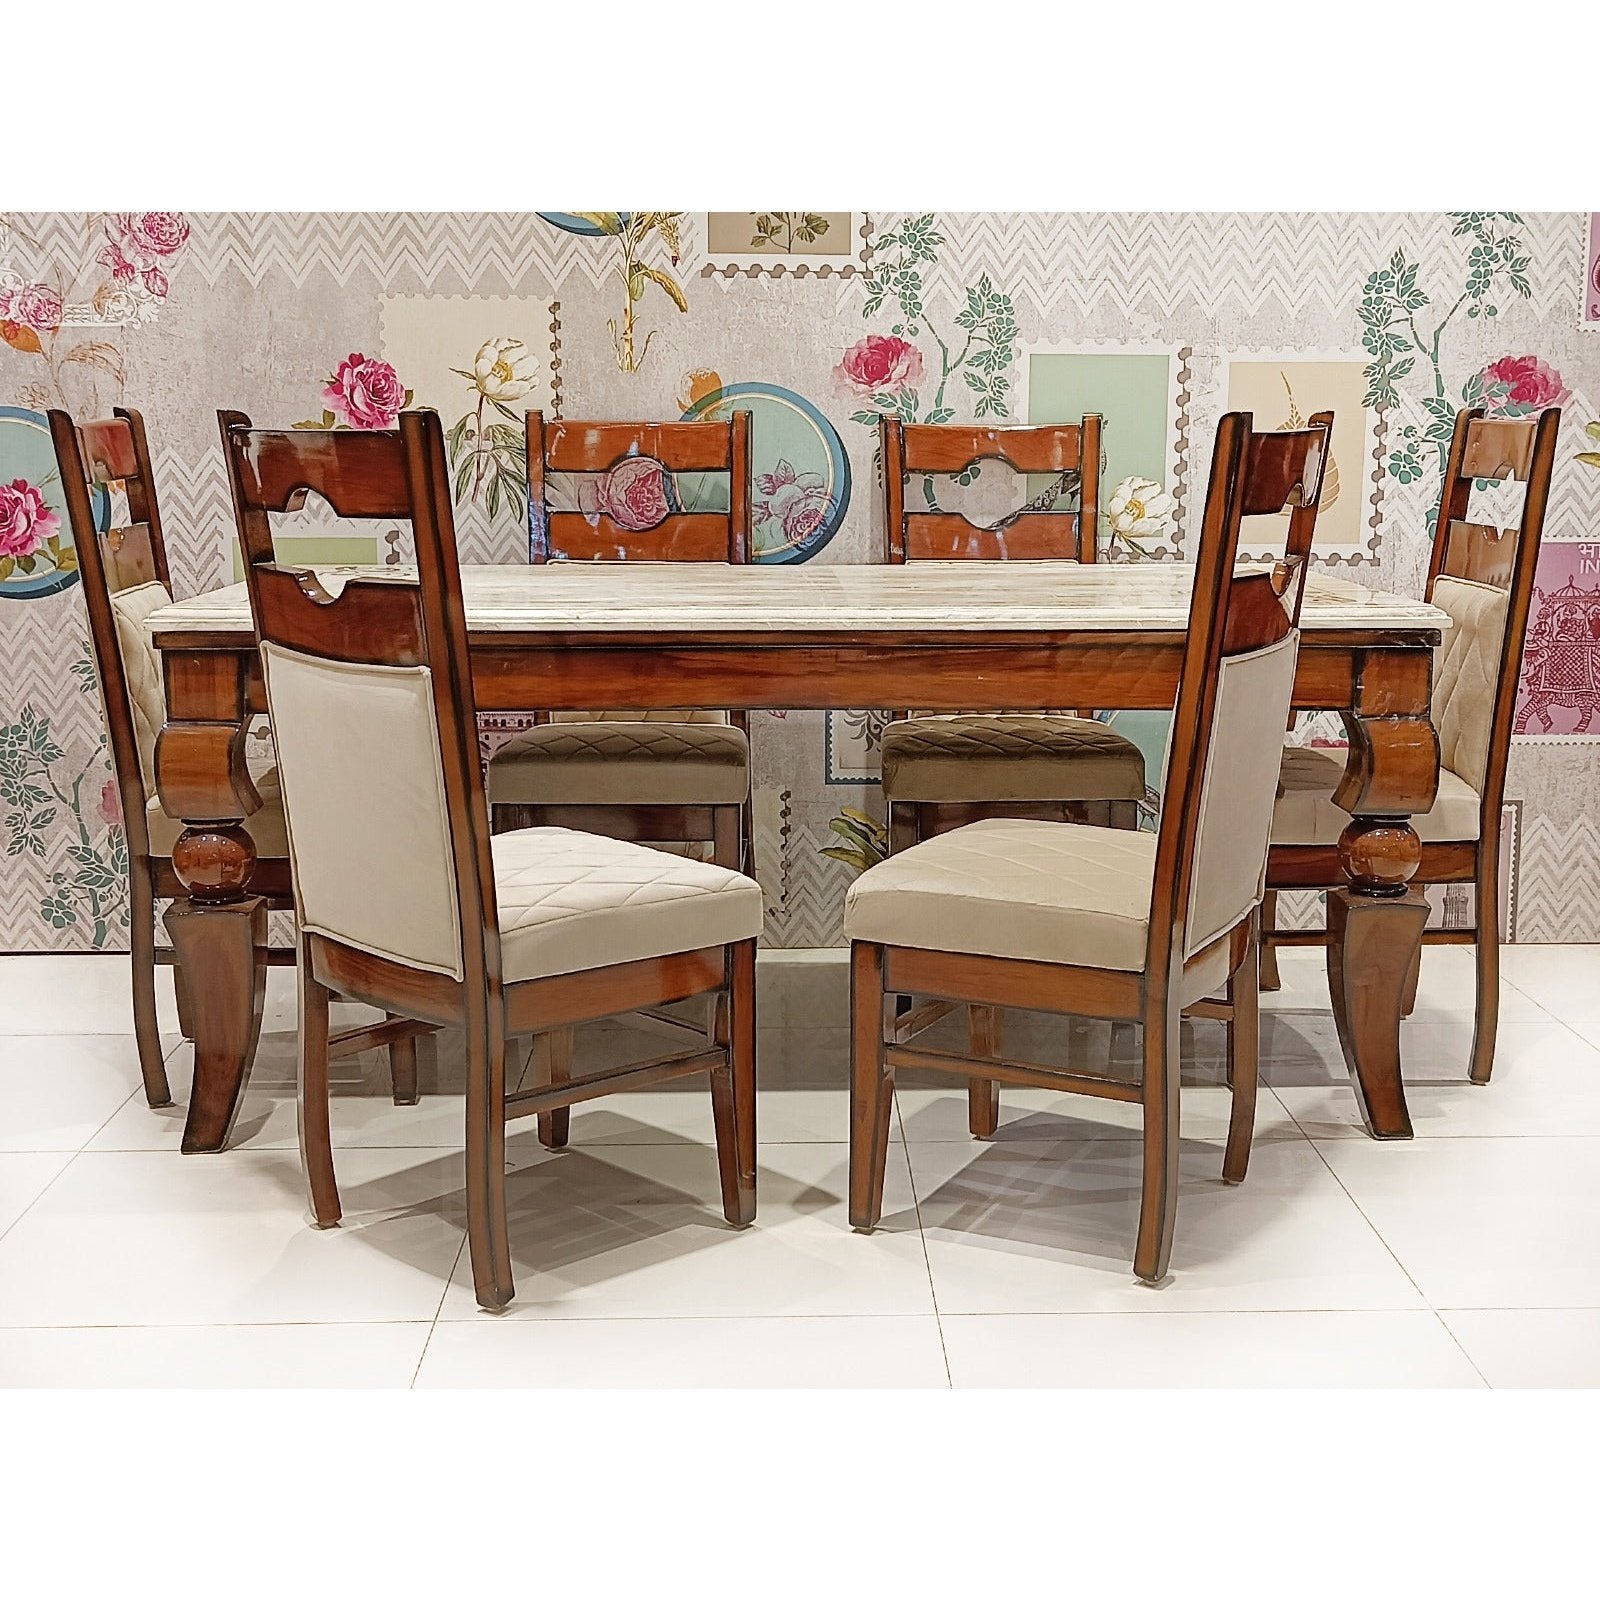 WO-STAR3 DINING TABLE 6 STR WITH CHAIR Mobel Furniture